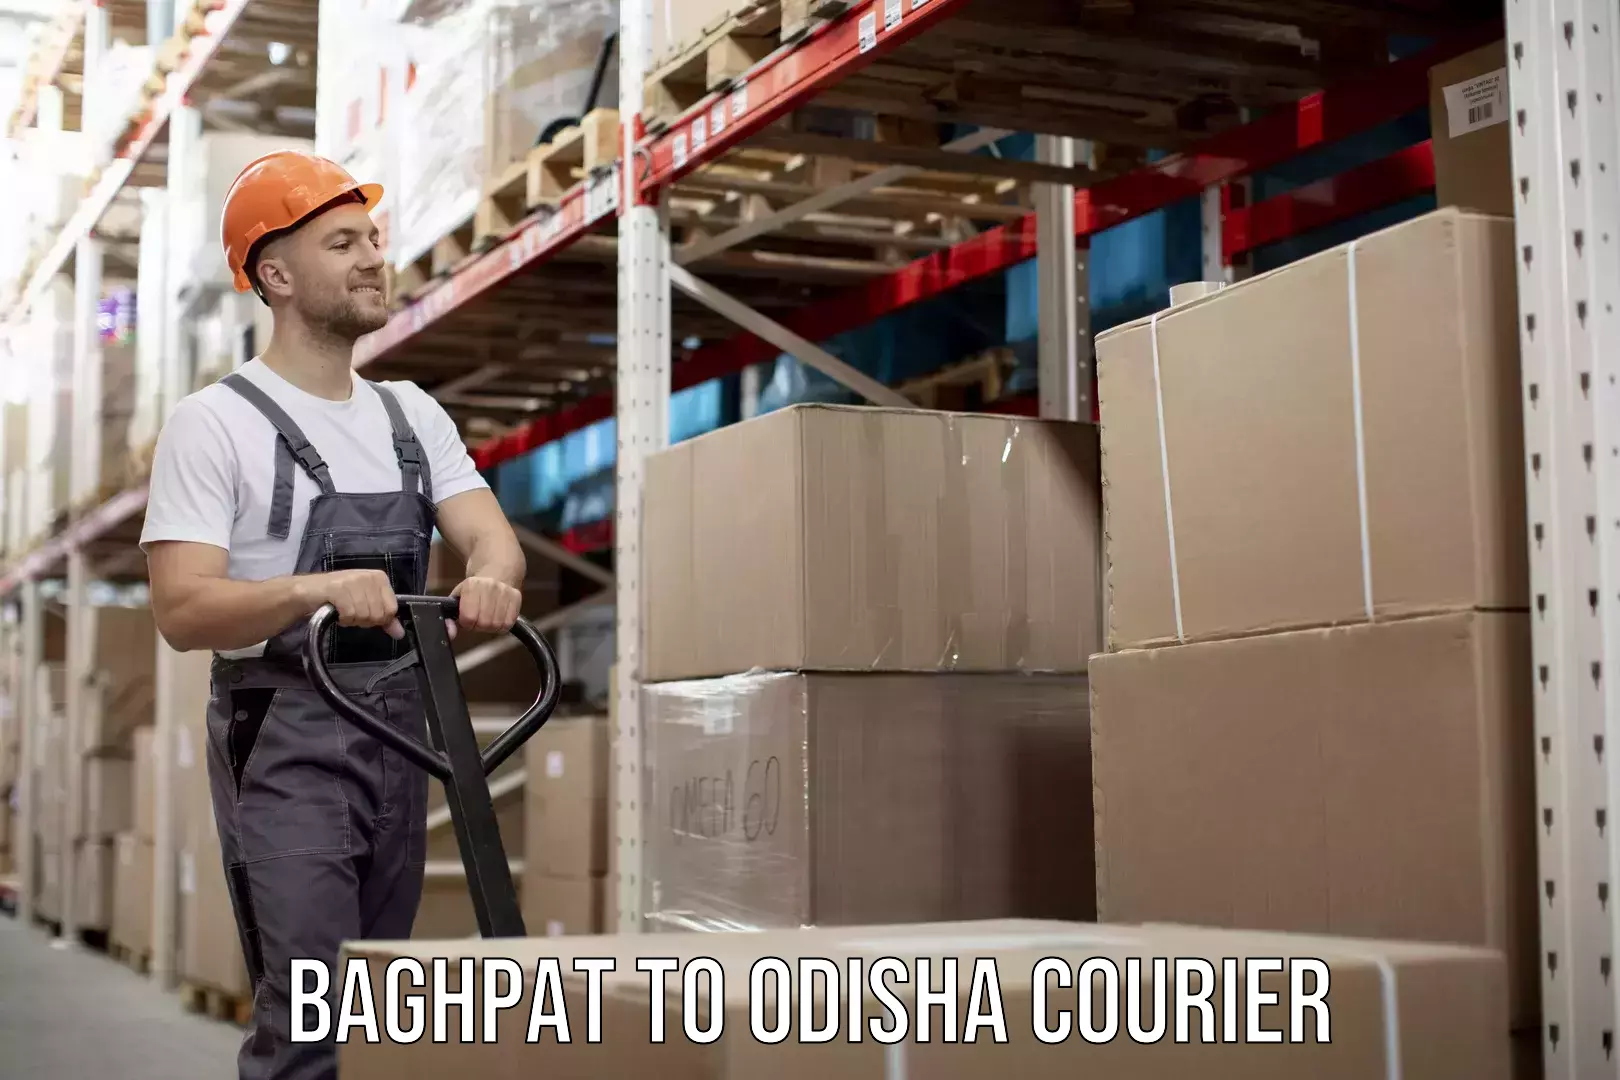 Multi-city courier Baghpat to Odisha